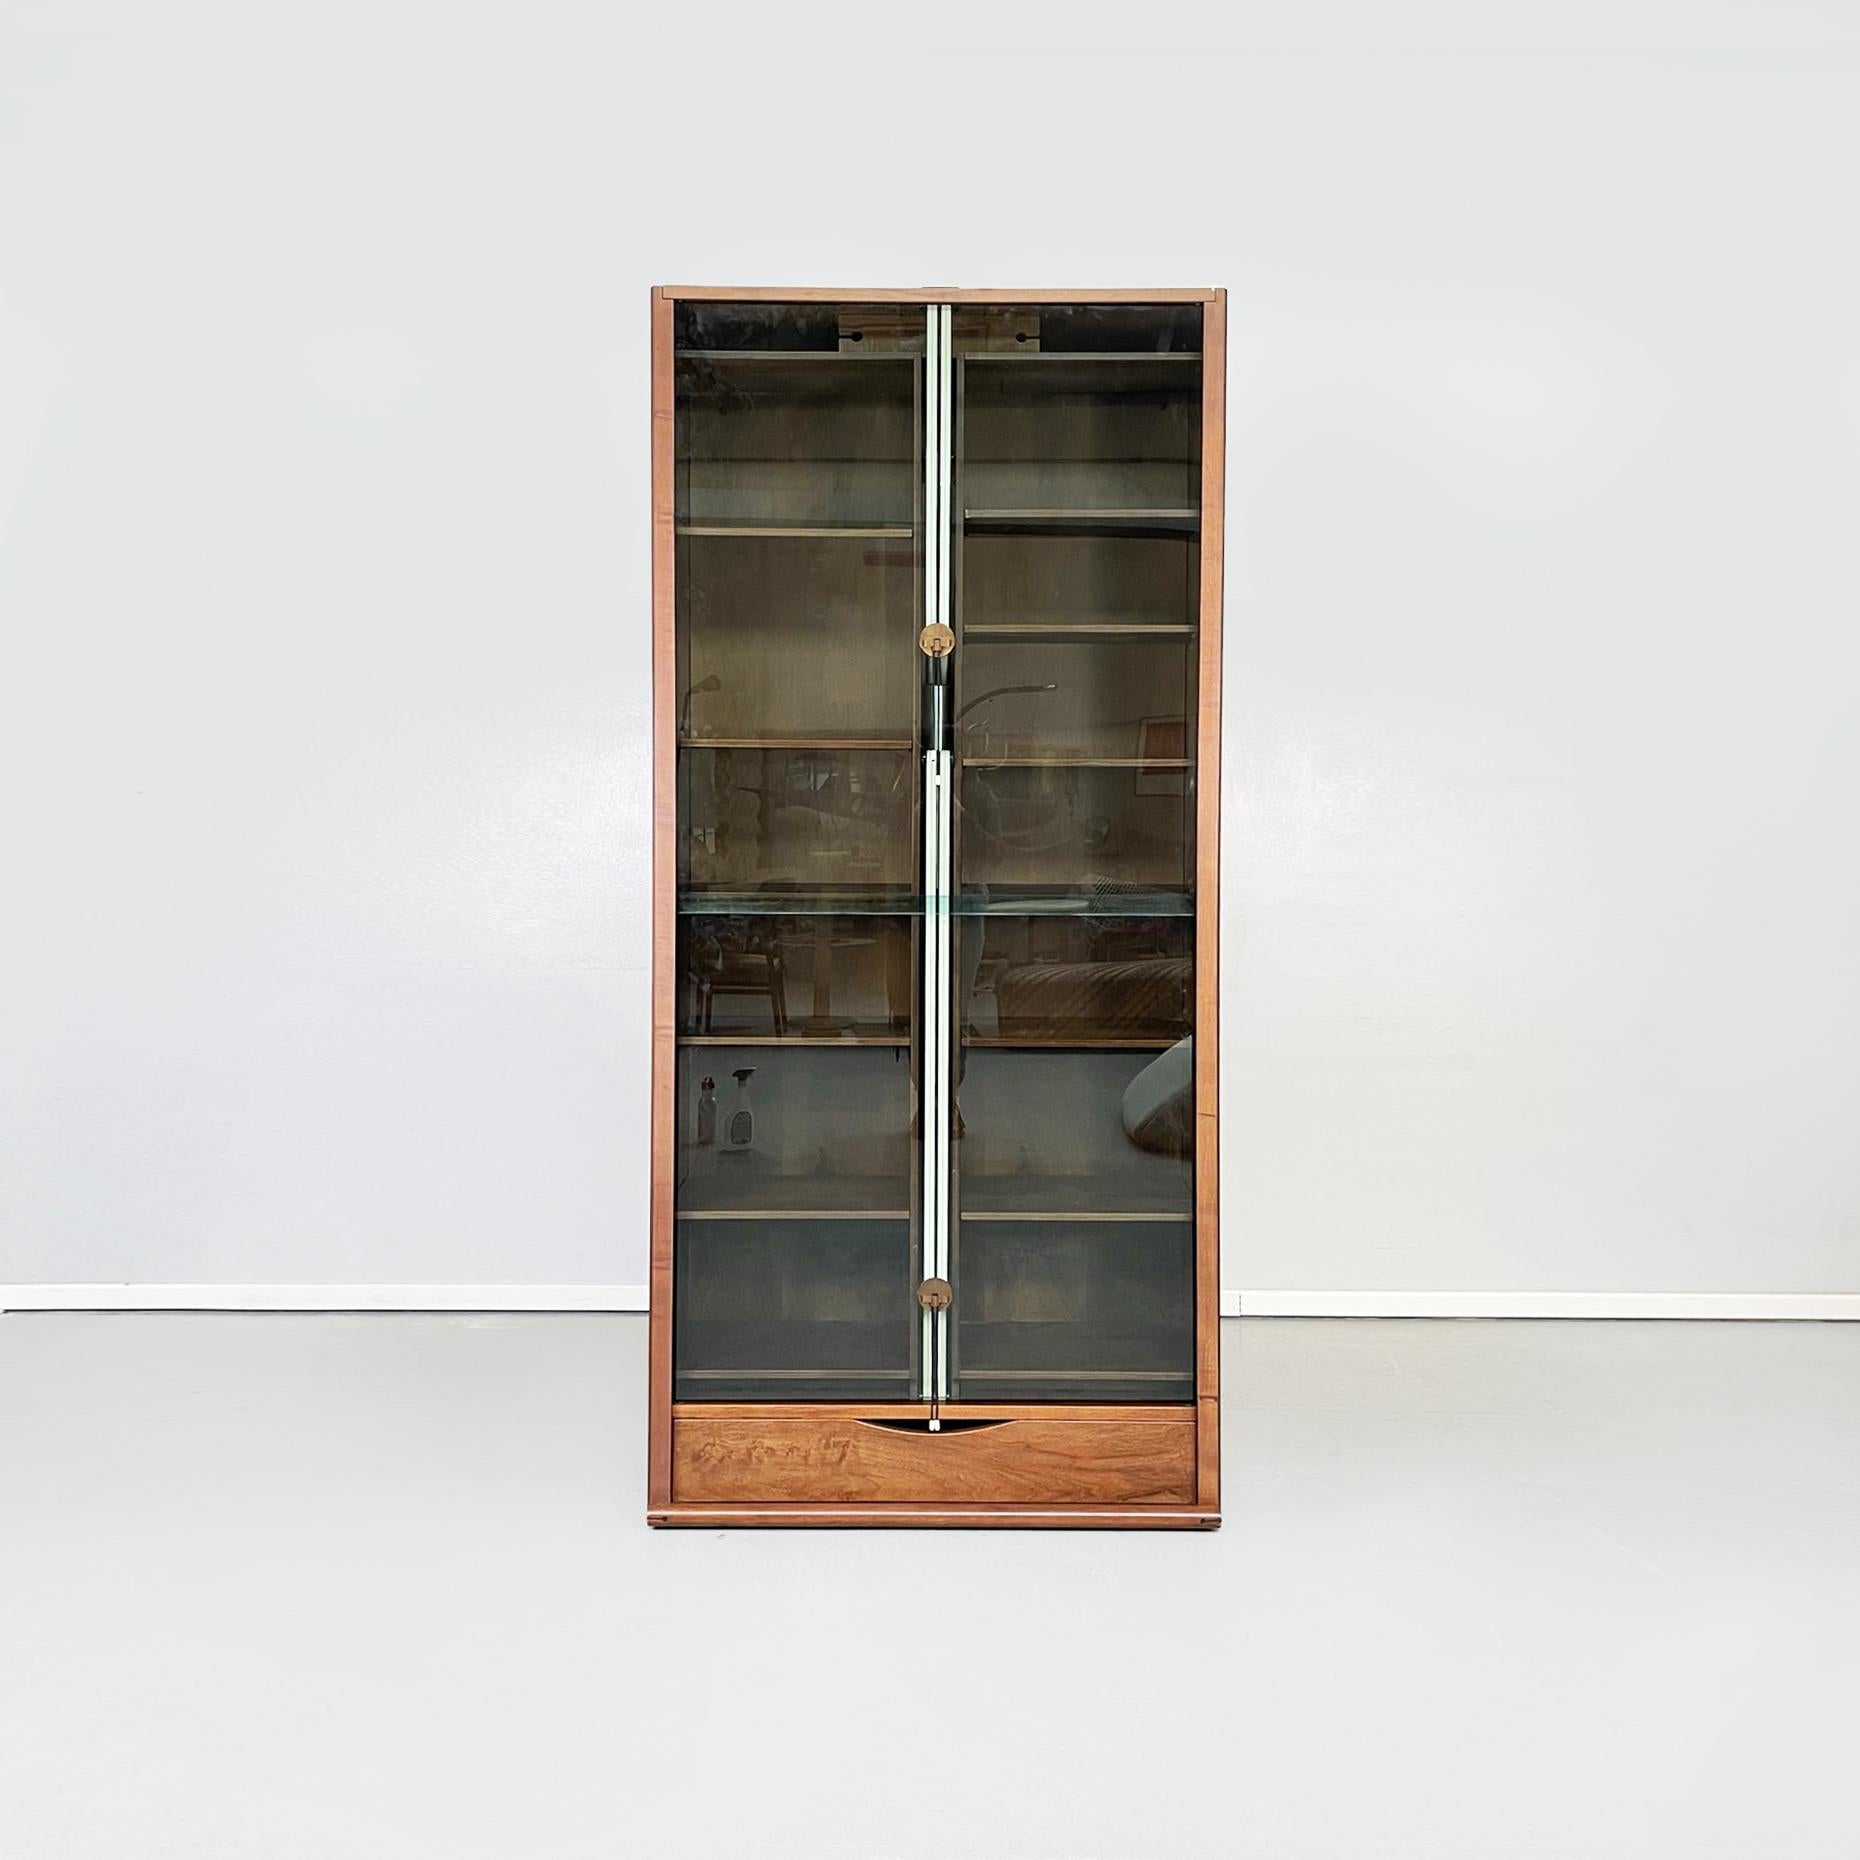 Italian modern Wooden and glass Bookcase mod. Zibaldone by Carlo Scarpa for Bernini, 1974
Bookcase mod. Zibaldone with structure in veneered wood and glass. This particular bookcase has 3 compartments: two accessible thanks to the sliding glass by